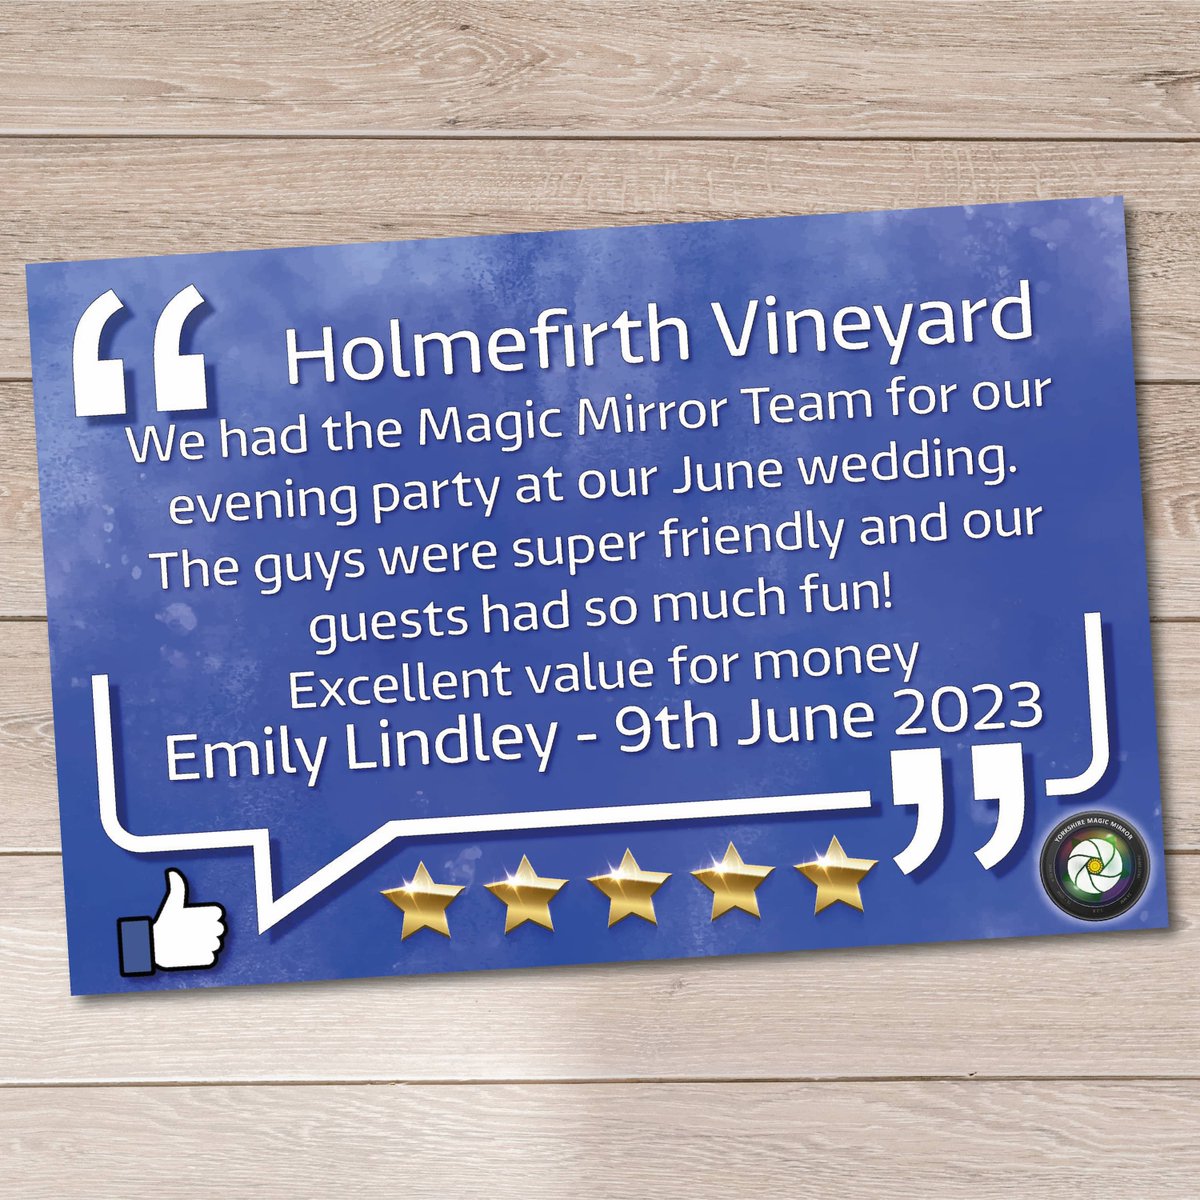 #5starreview #5starreviews #customerappreciation #customerexperience #customerfeedback #customerreview #customerreviews #customersatisfaction #feedback #fivestarreviews #facebookreviews #happyclients #happycustomer #review #reviews #testimonial #yorkshire #yorkshiremagicmirror